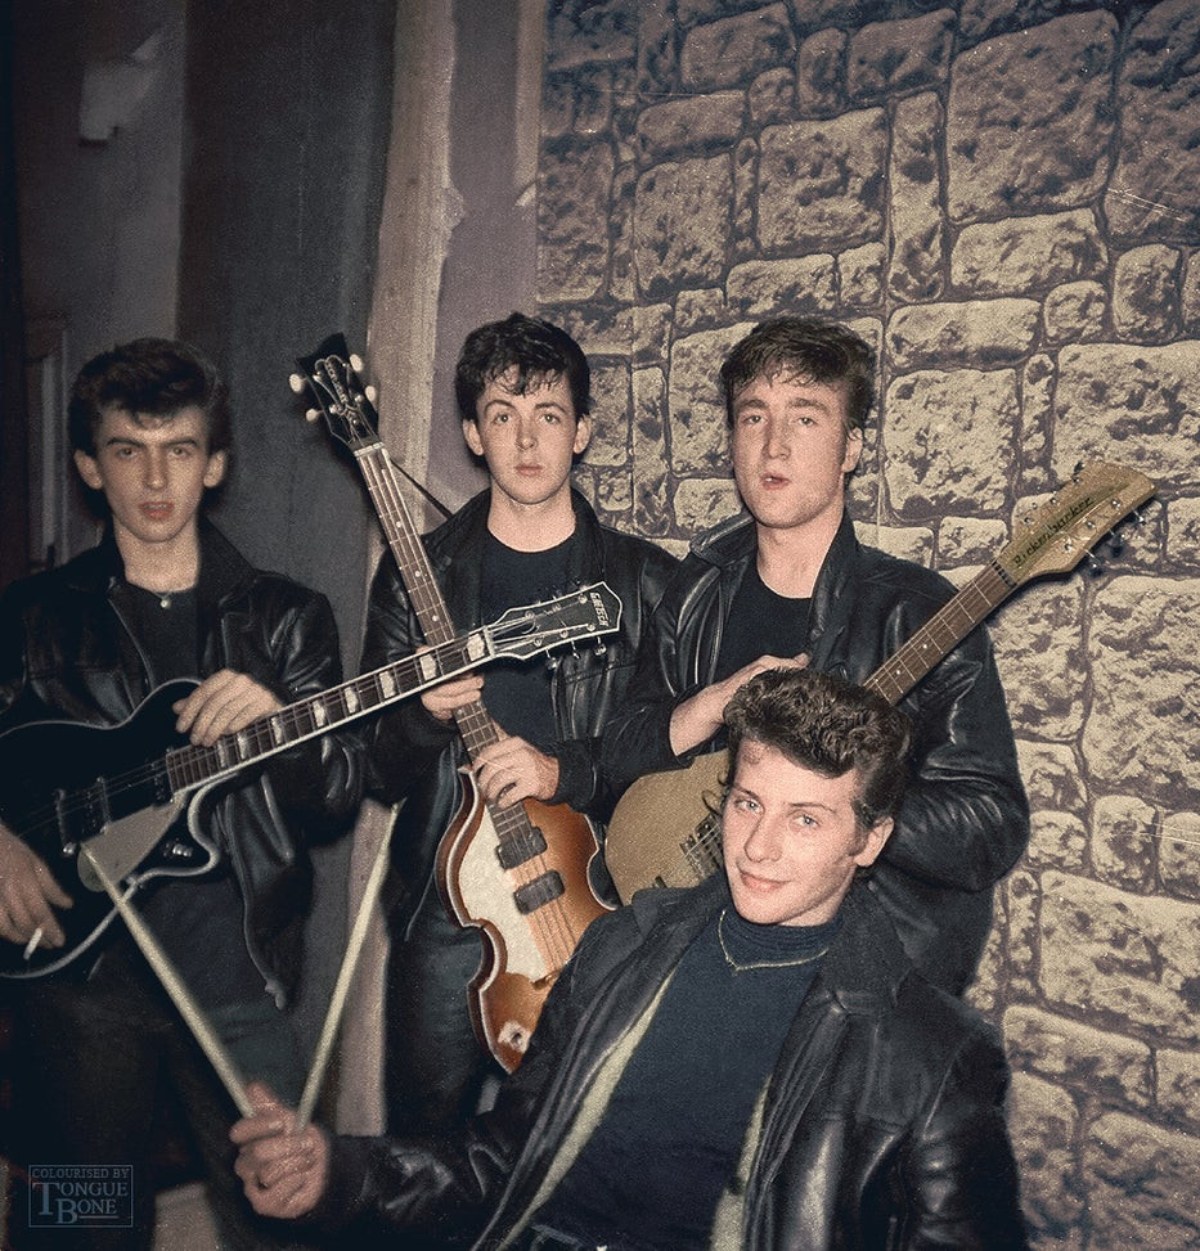 The Beatles with Pete Best